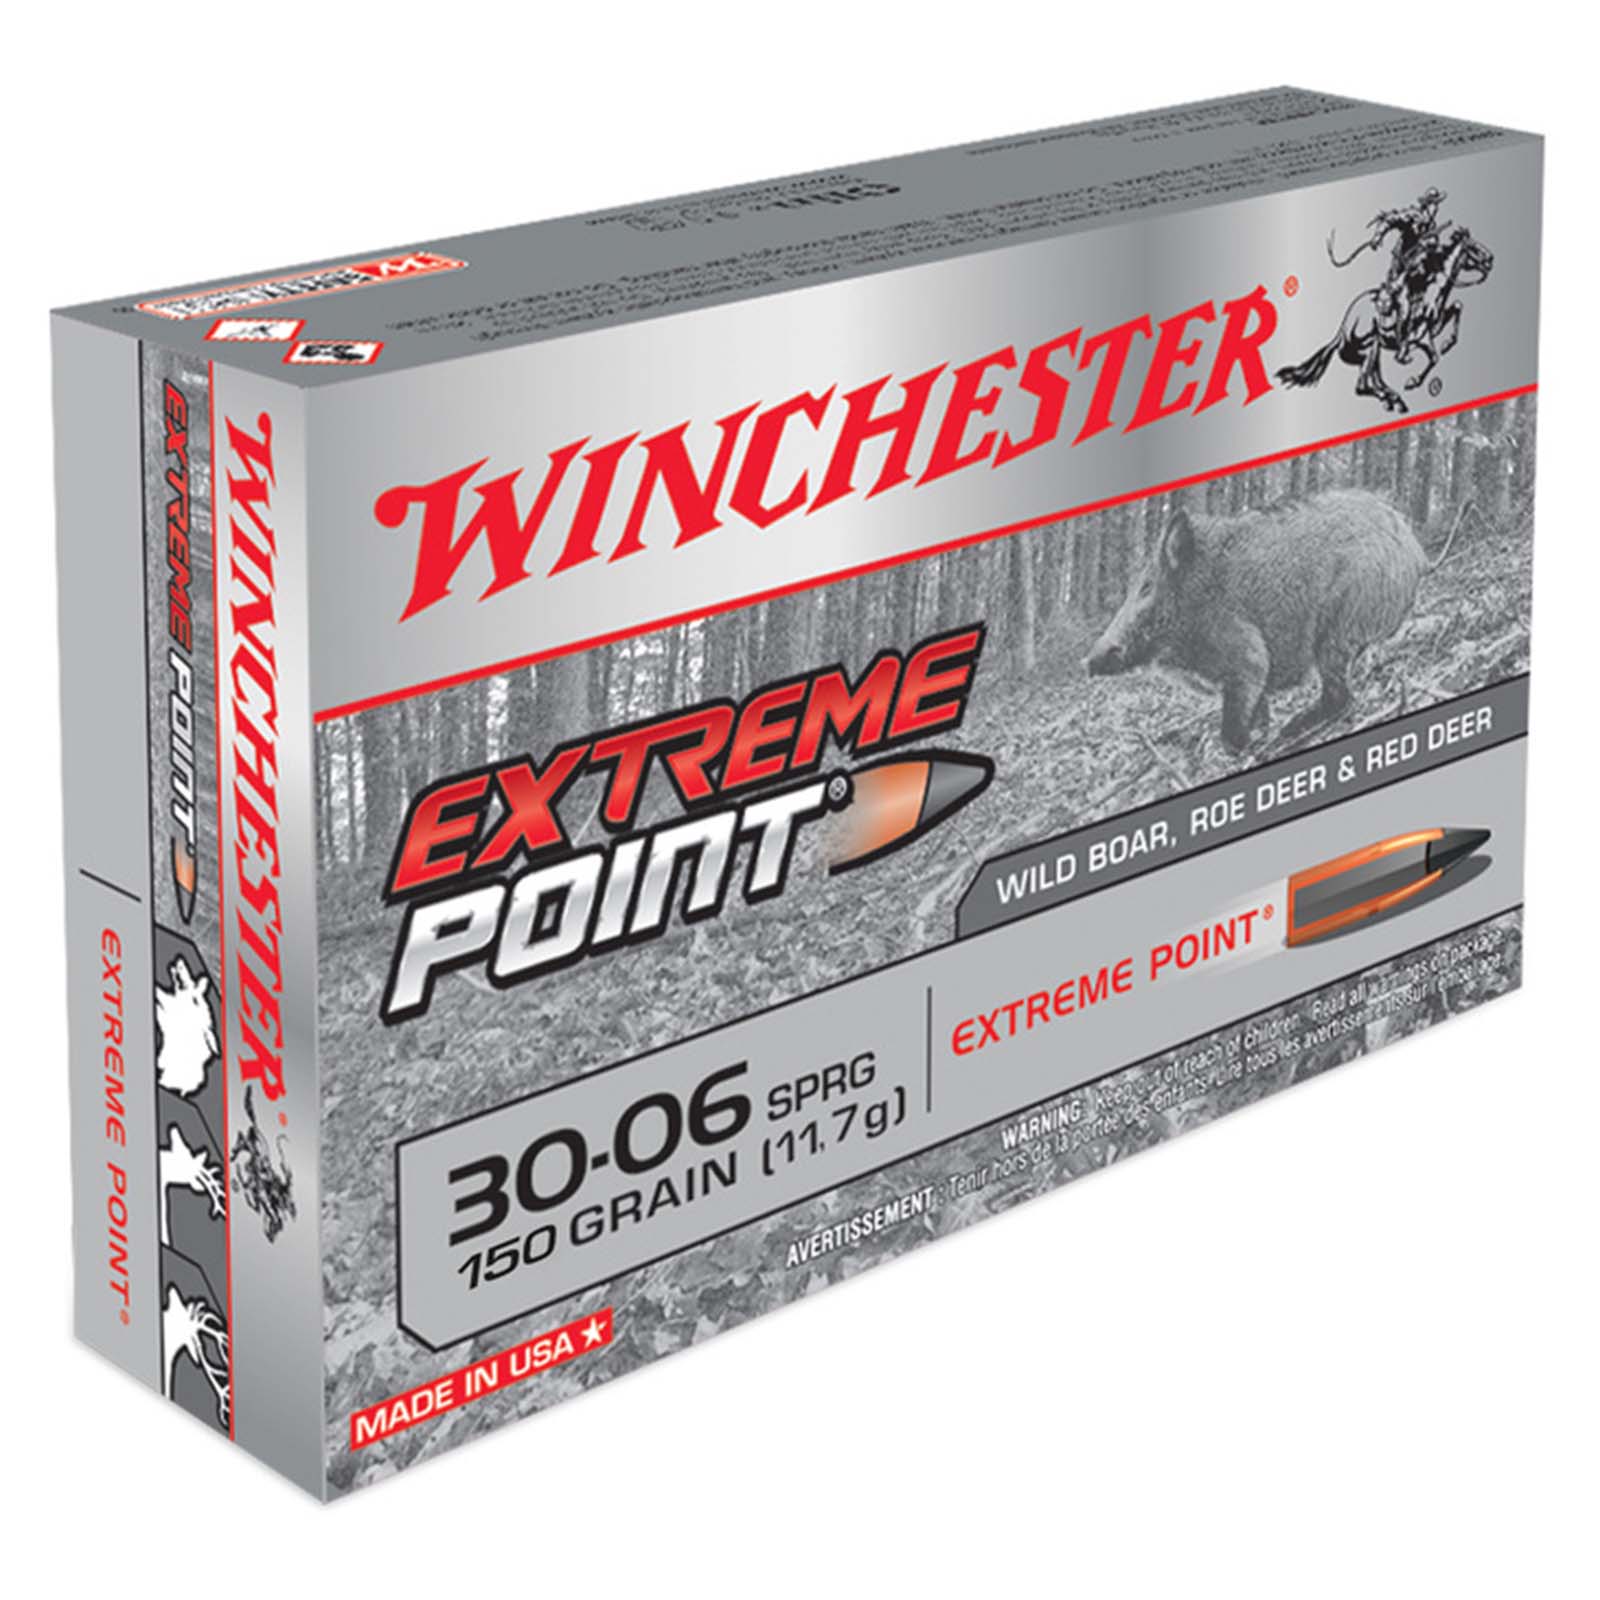 WINCHESTER .30-06 Springfield 150GR Extreme Point